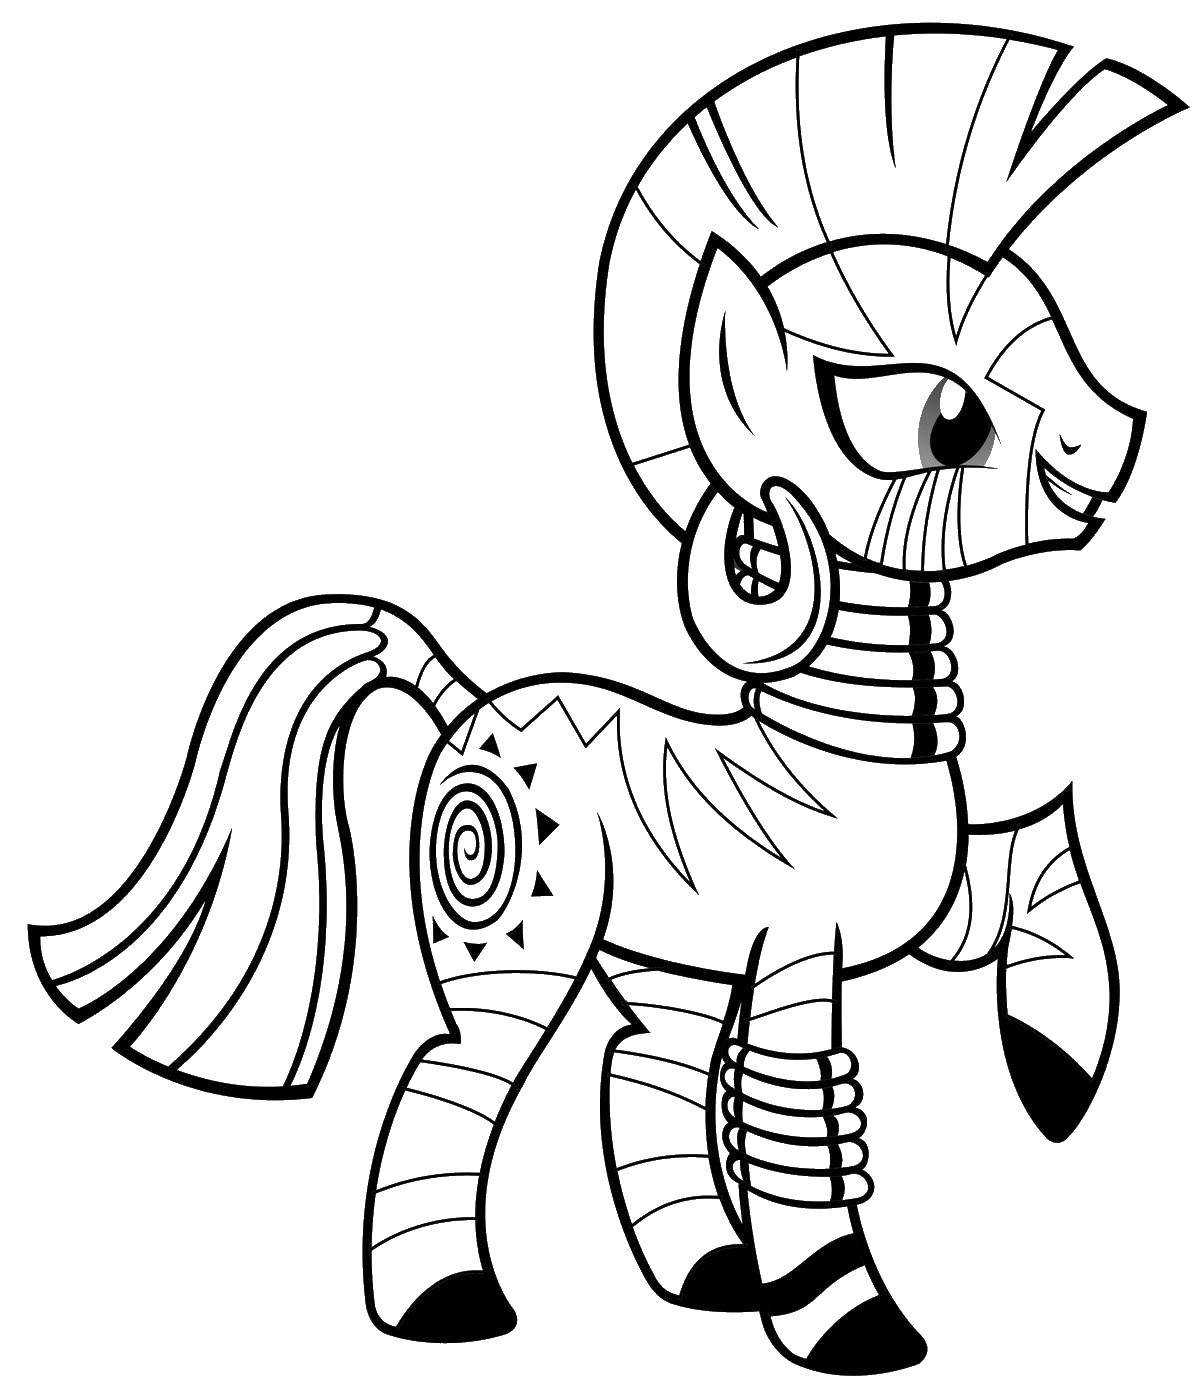 Coloring Beautiful pony. Category Ponies. Tags:  Pony, My little pony.